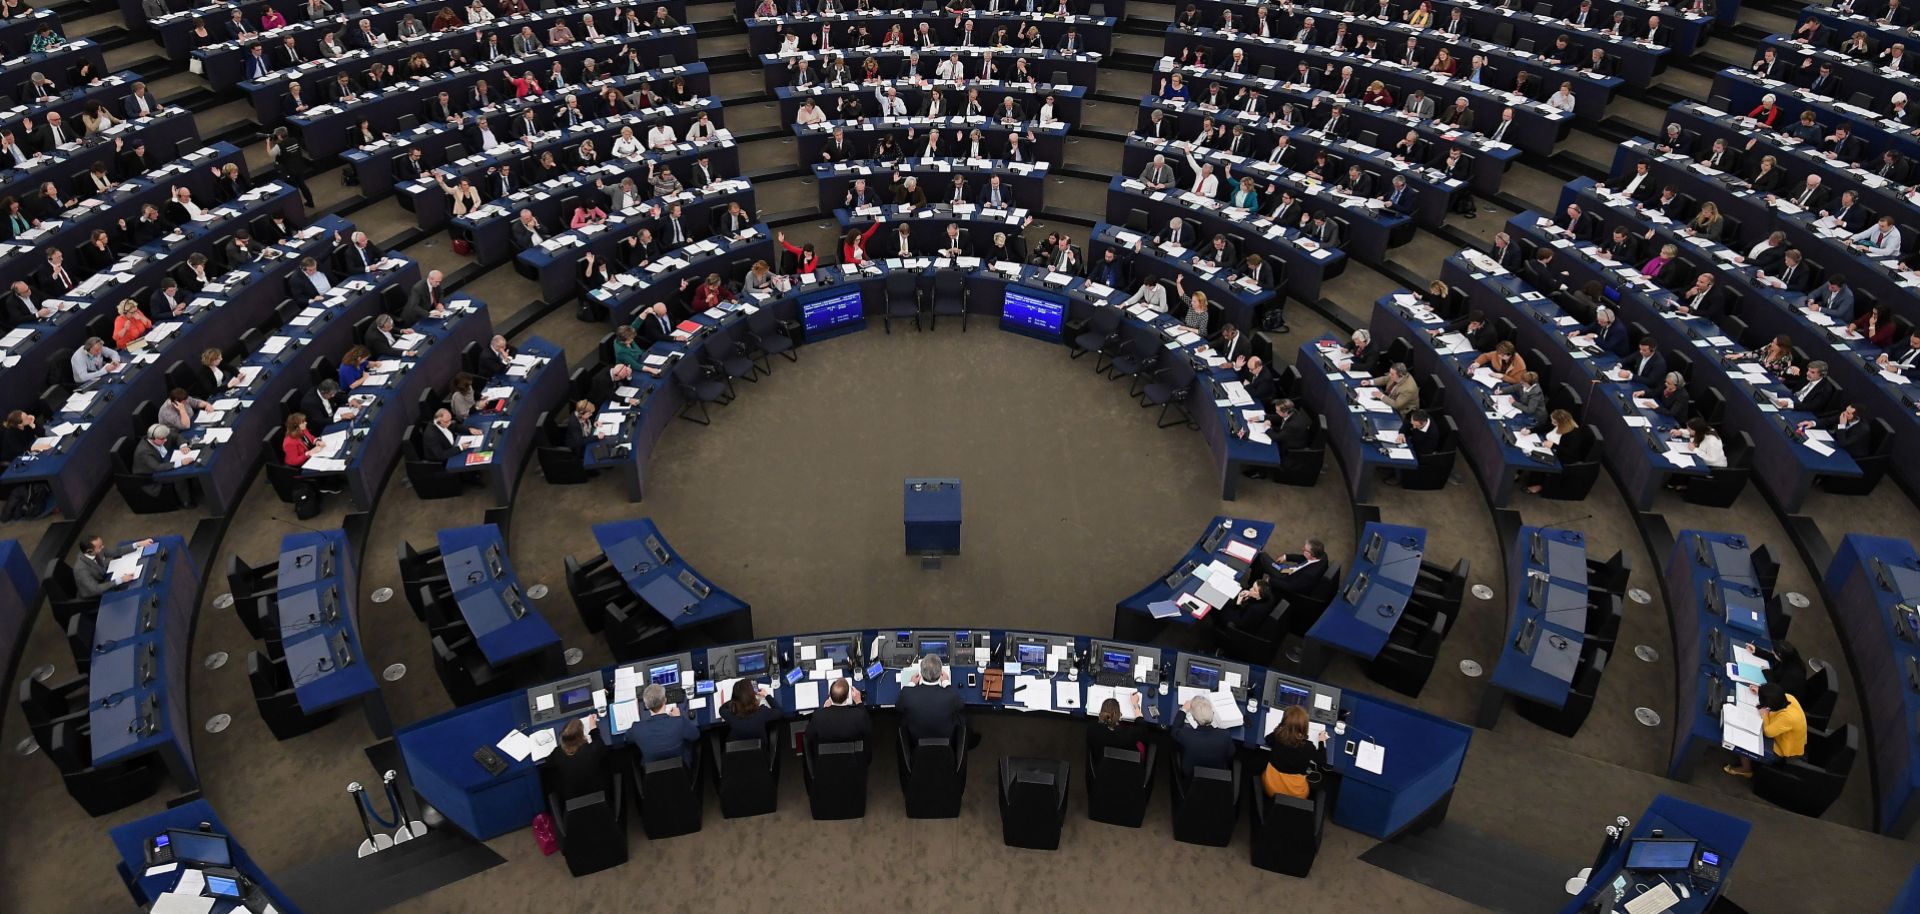 Members of the European Parliament vote during a plenary session on Nov. 14, 2018, in Strasbourg, France.